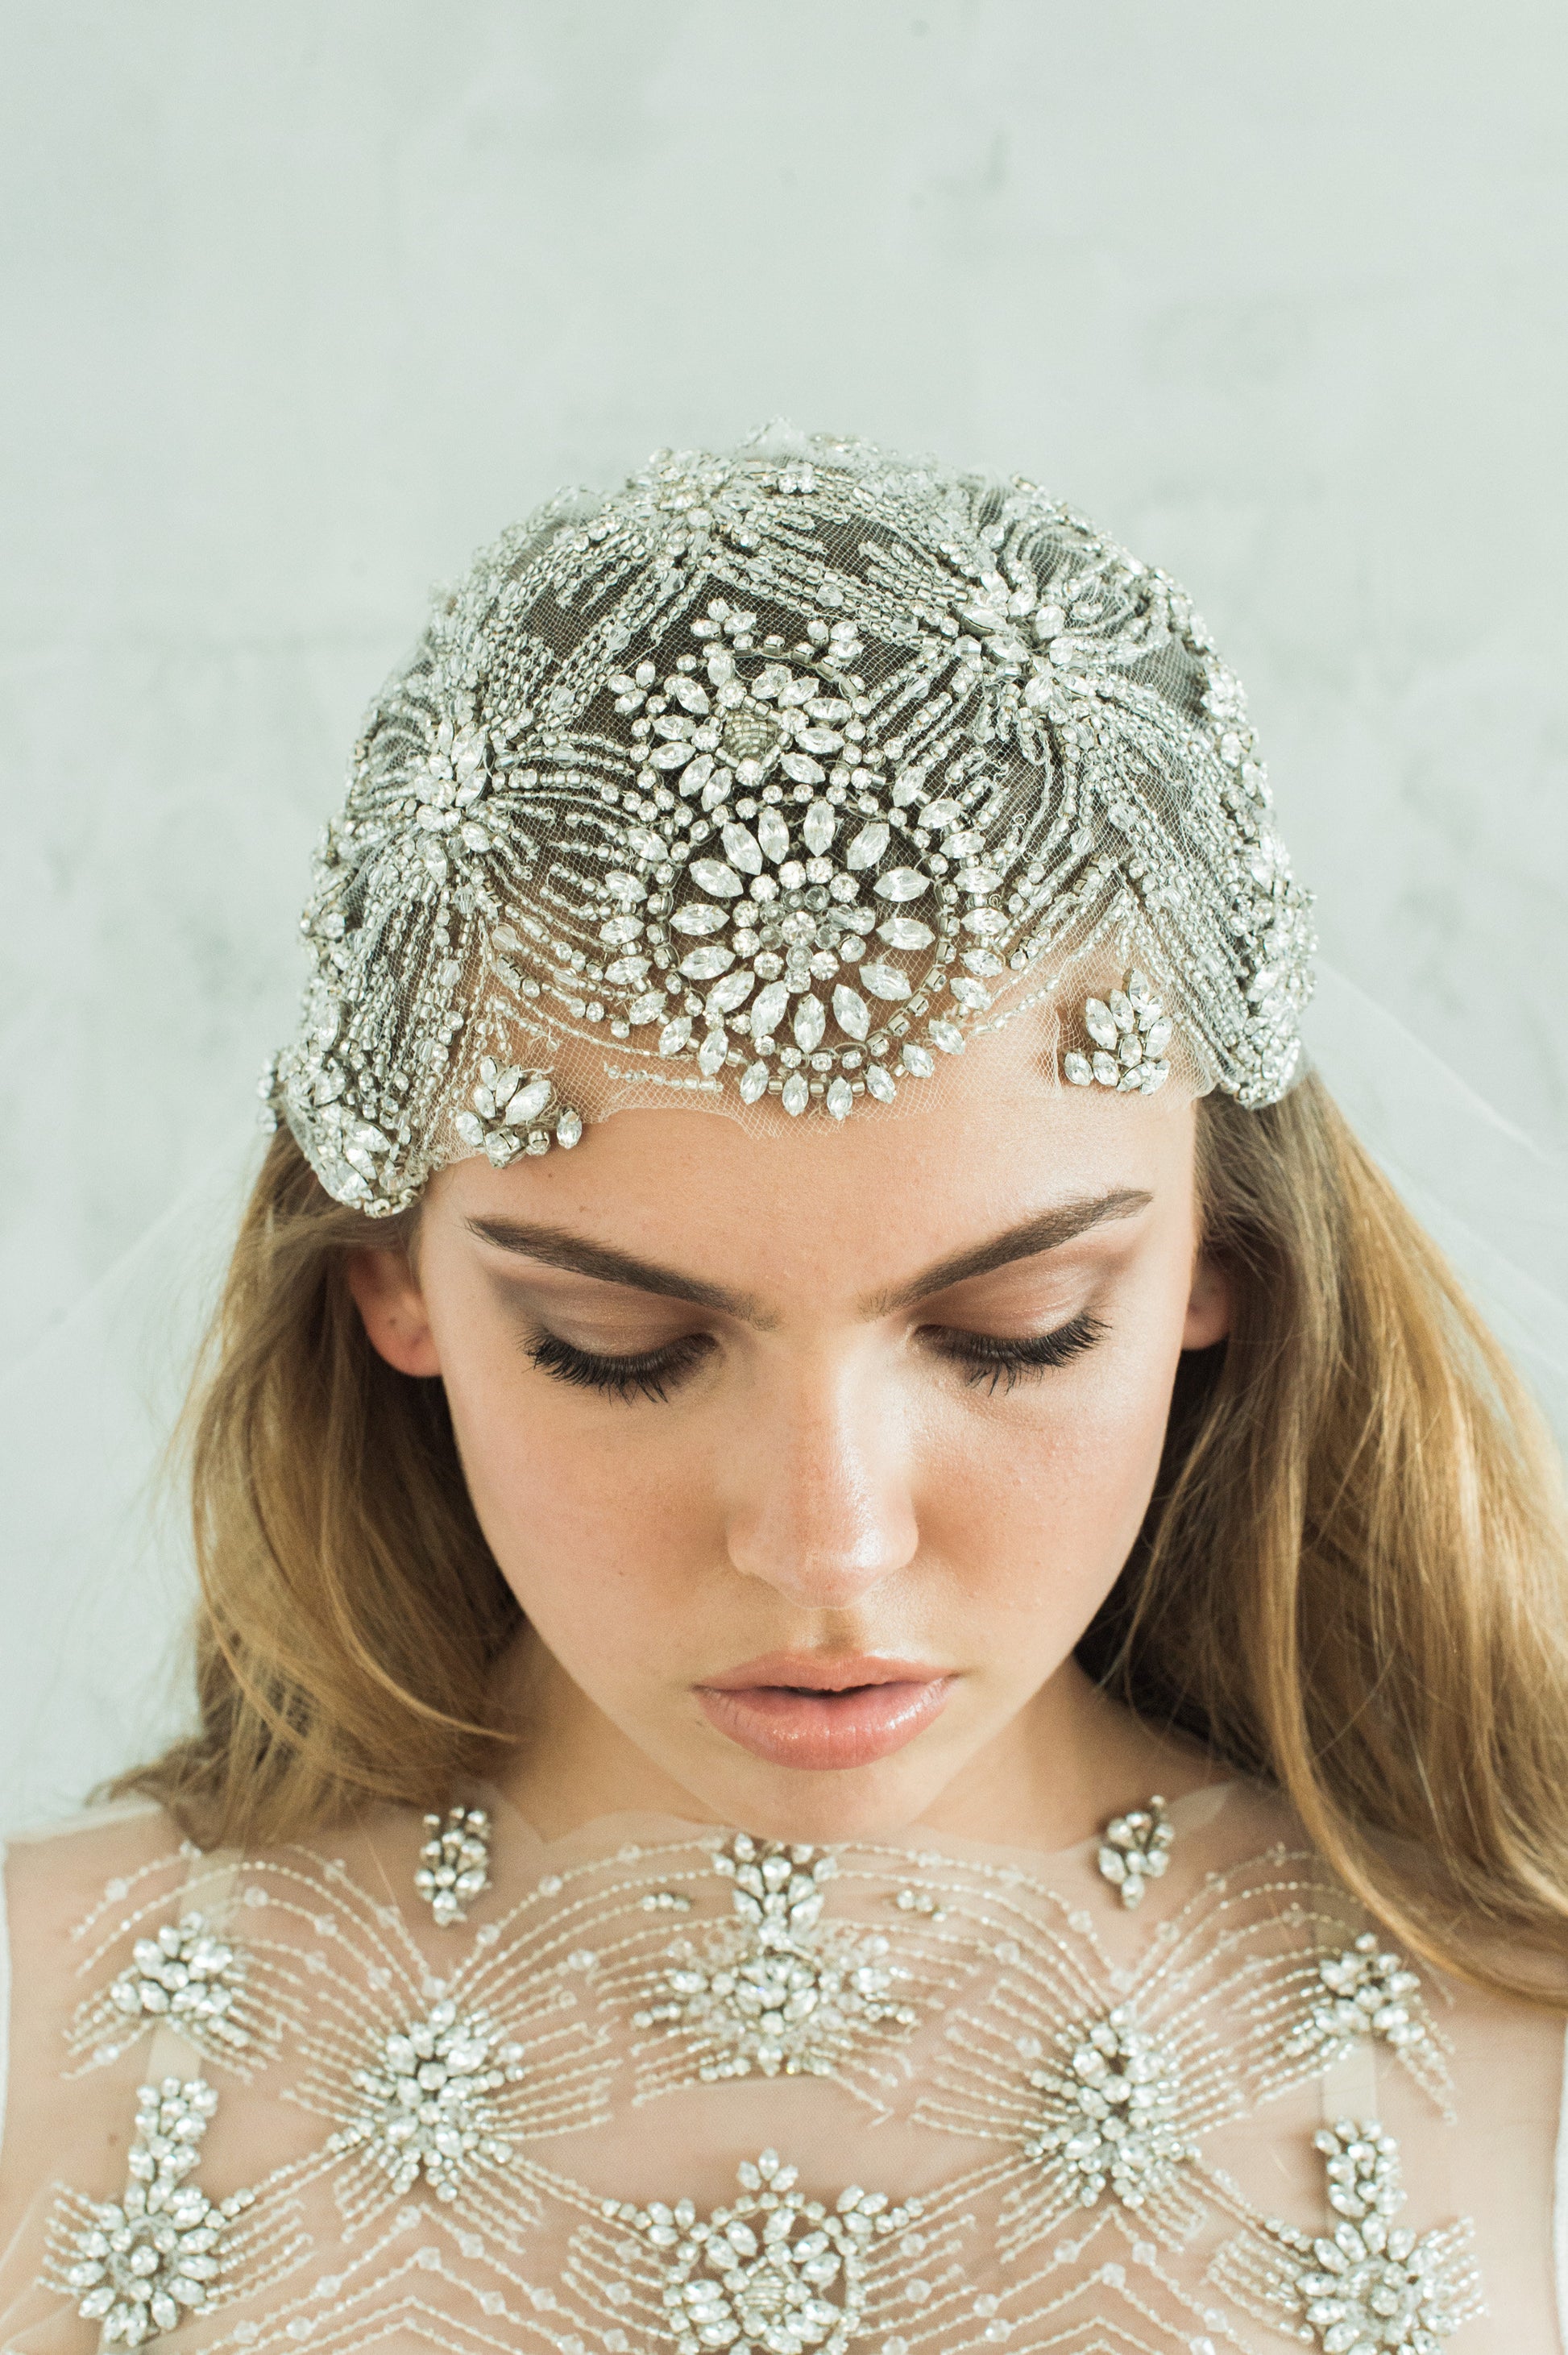 Juliet Cap Wedding Veil Beaded Bridal Veil Art Deco Headpiece Crystal Embellished Veil Vintage Gatsby Hair Accessory Jeweled 1920s, DAISY VEIL for Her, for Bride, for Bridesmaid Gift , for Mother of the Bride, for Wedding Guest or Special Occasion by Camilla Christine Bridal Jewelry and Wedding Accessories. Bridal Style Inspiration Trends for Bride, Wedding Ideas